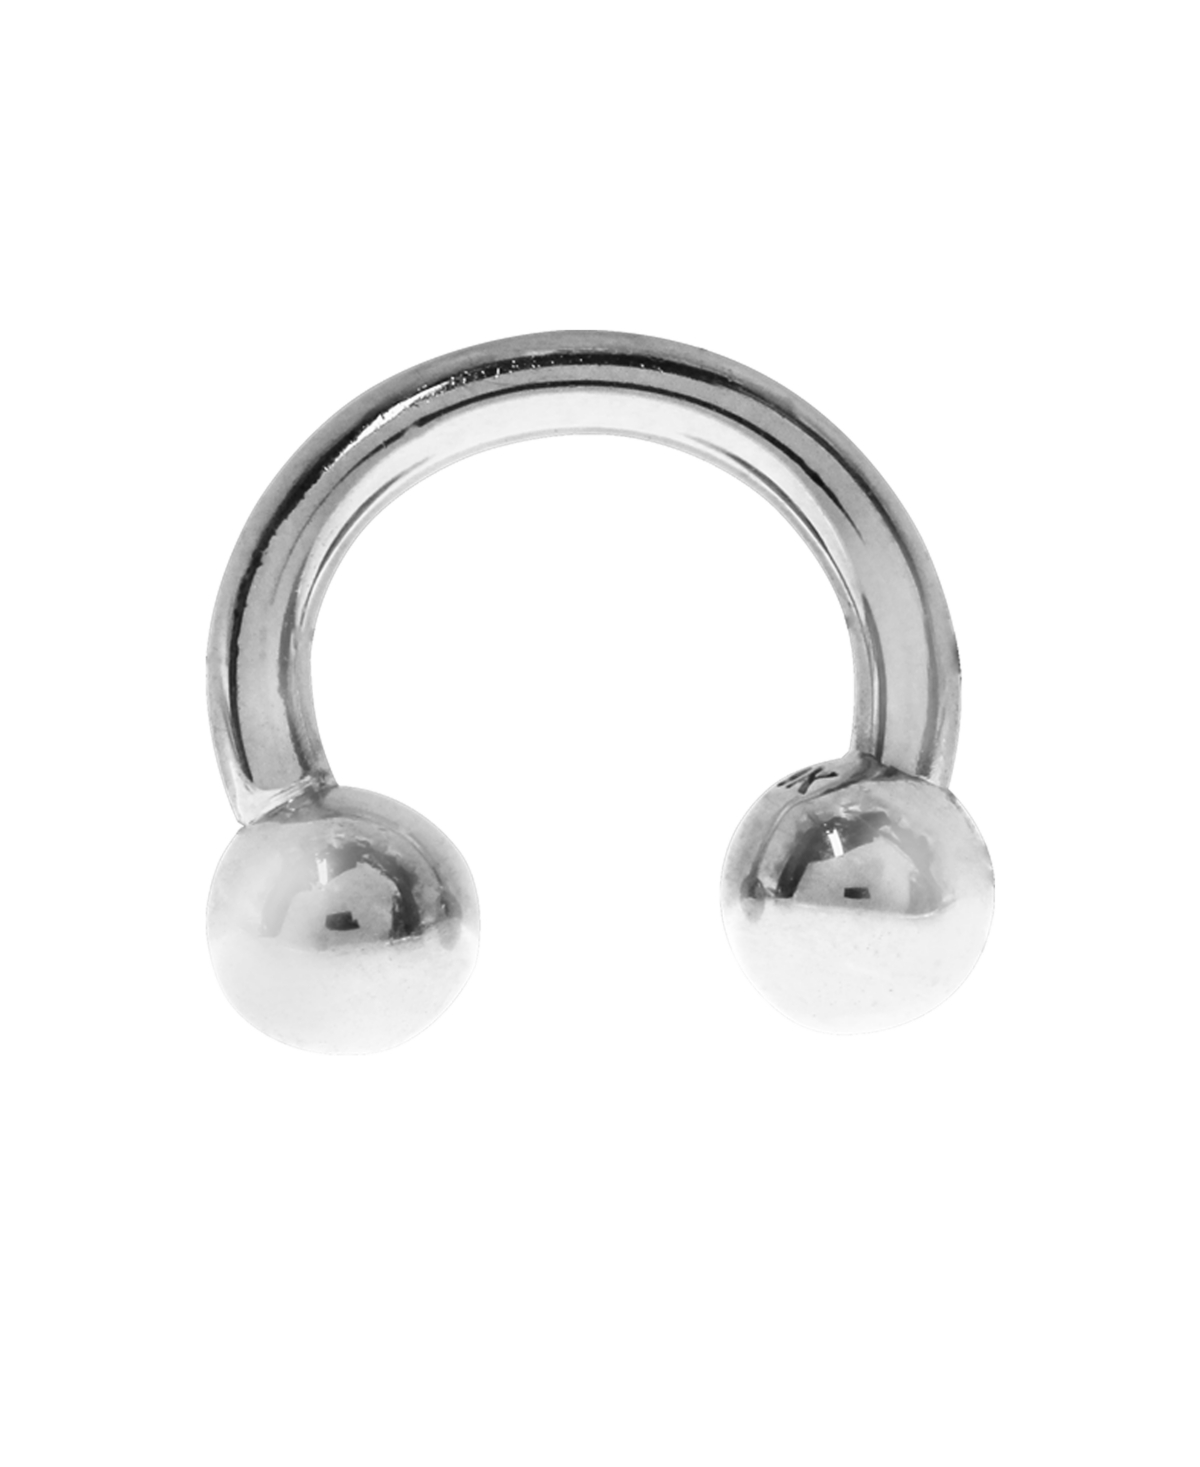 Bodifine Stainless Steel Eyebrow Ring - Silver